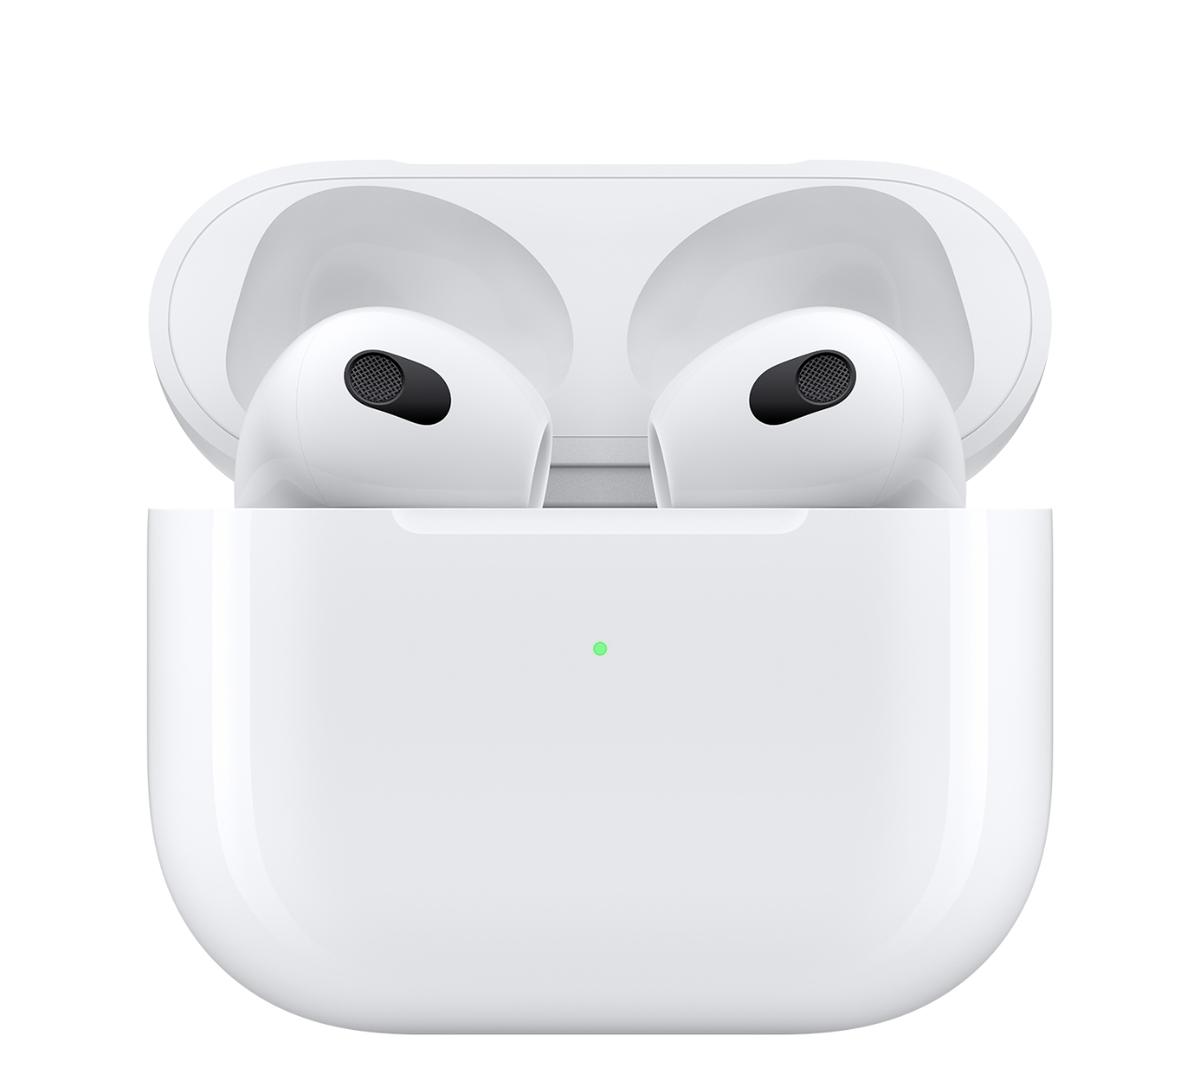 AirPods 3rd Generation: Enhanced Design, Longer Battery Life, and Sweat/Water Resistance